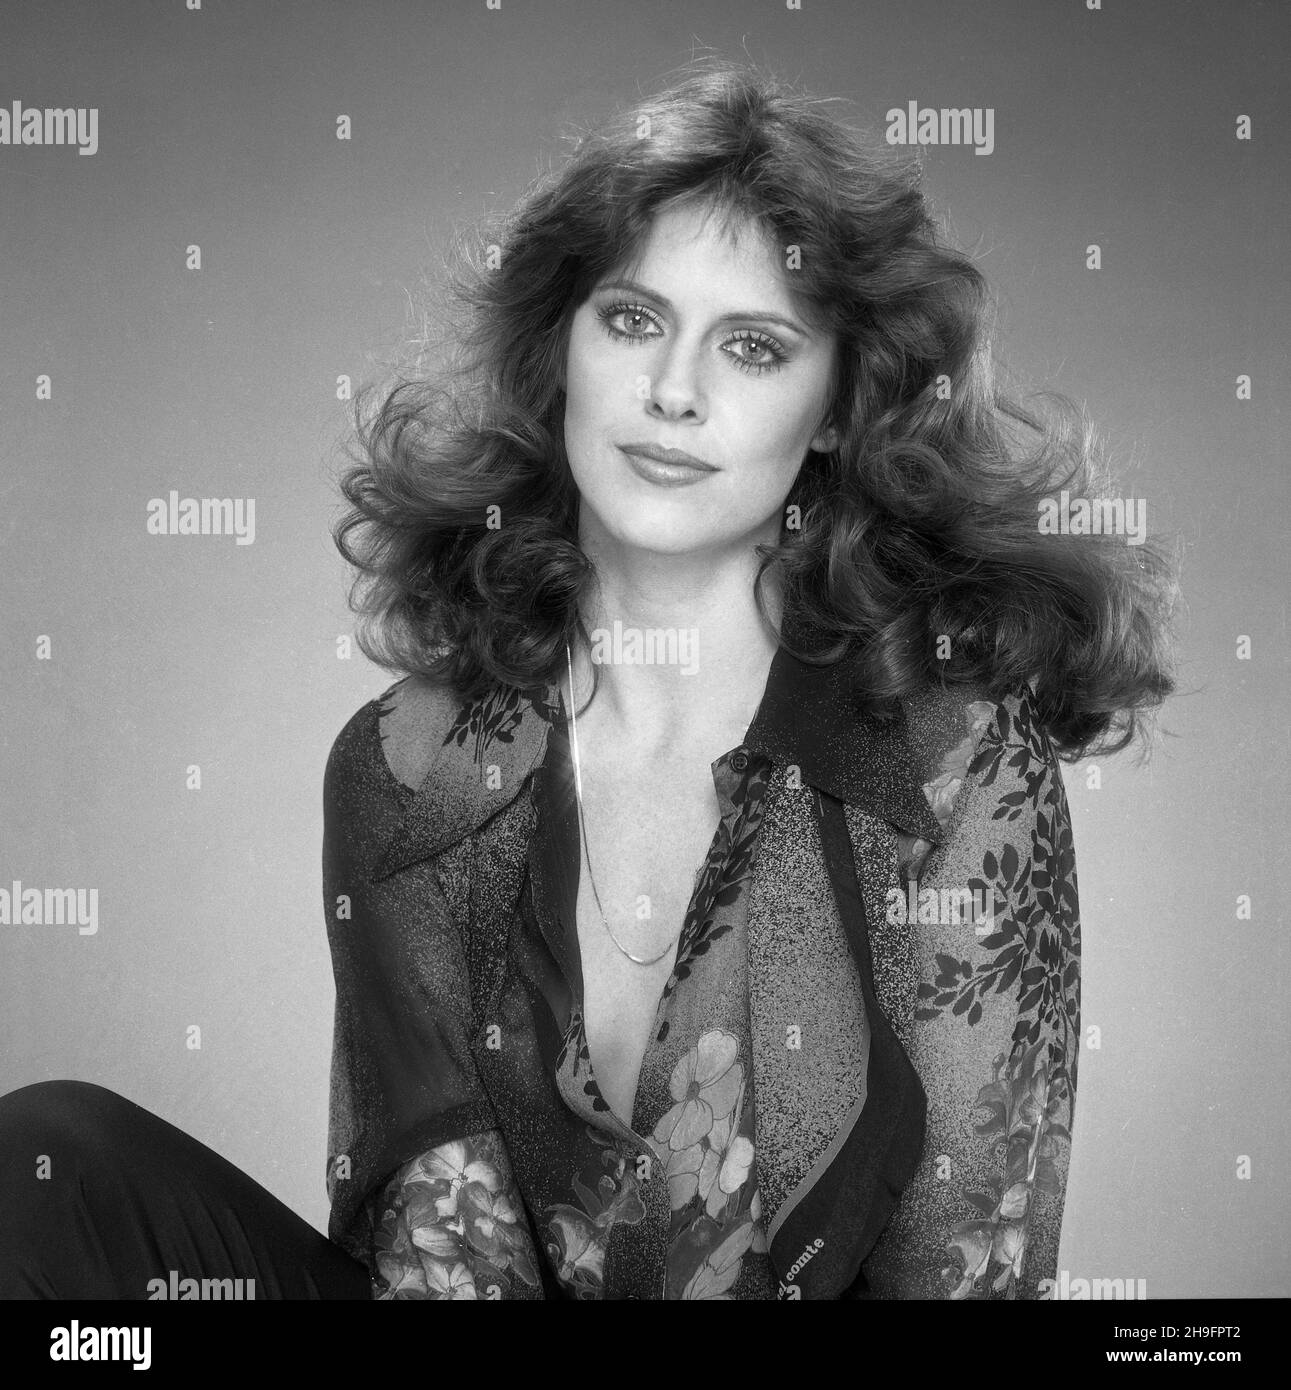 Pam Dawber Poses For A Portrait 1978 In Los Angeles California Credit